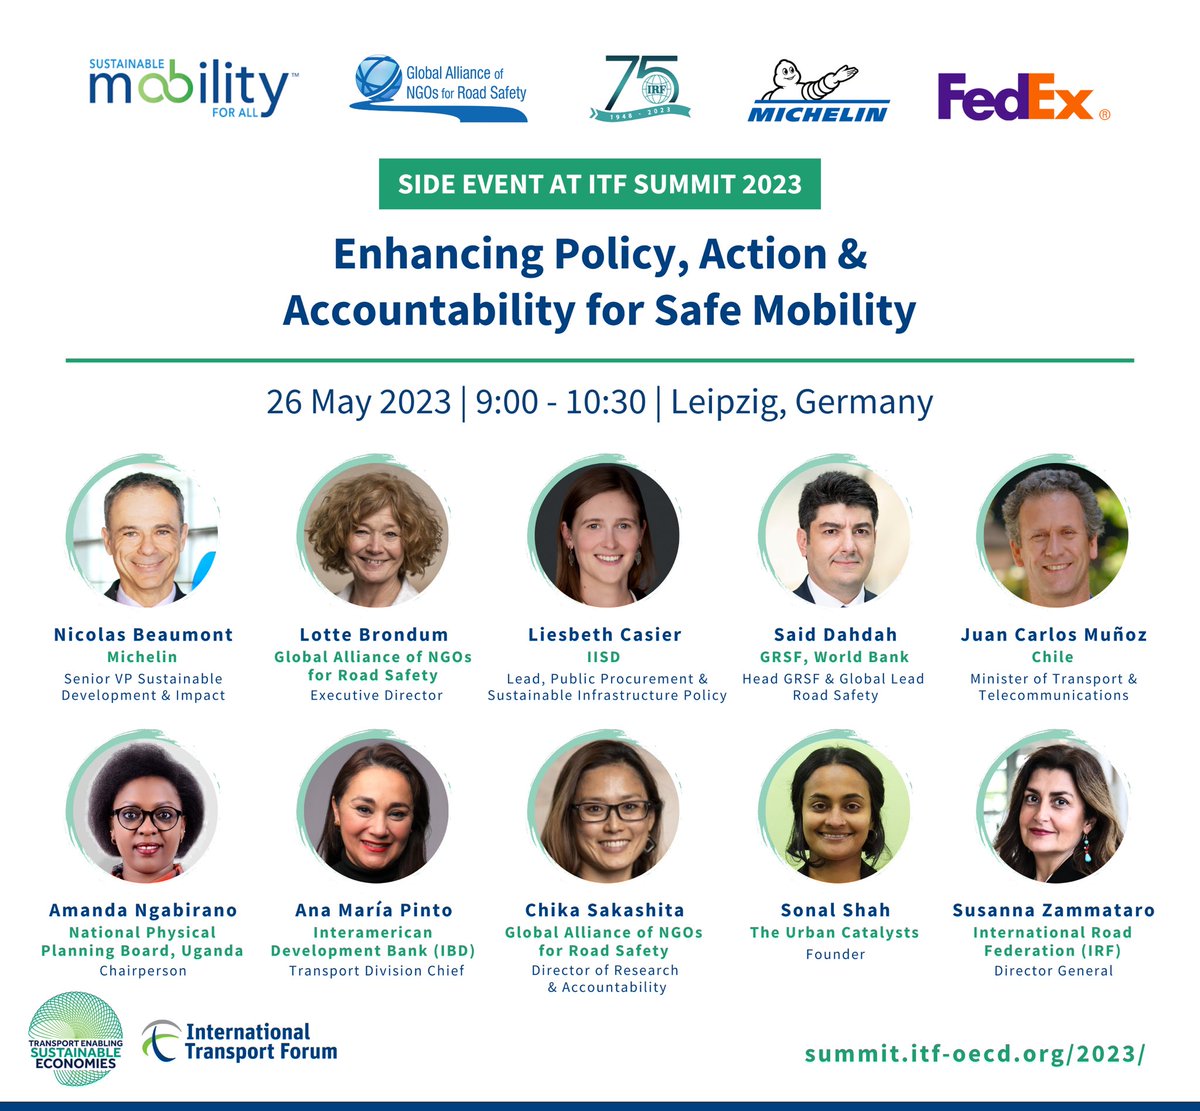 Check out the superb panel lined up for side event Enhancing Policy, Action & Accountability for Safe Mobility that we are hosting with #Sum4All @irfgtkp @Michelin. If you are at #ITF23 @ITF_Forum this week, join us tomorrow at 9:00.